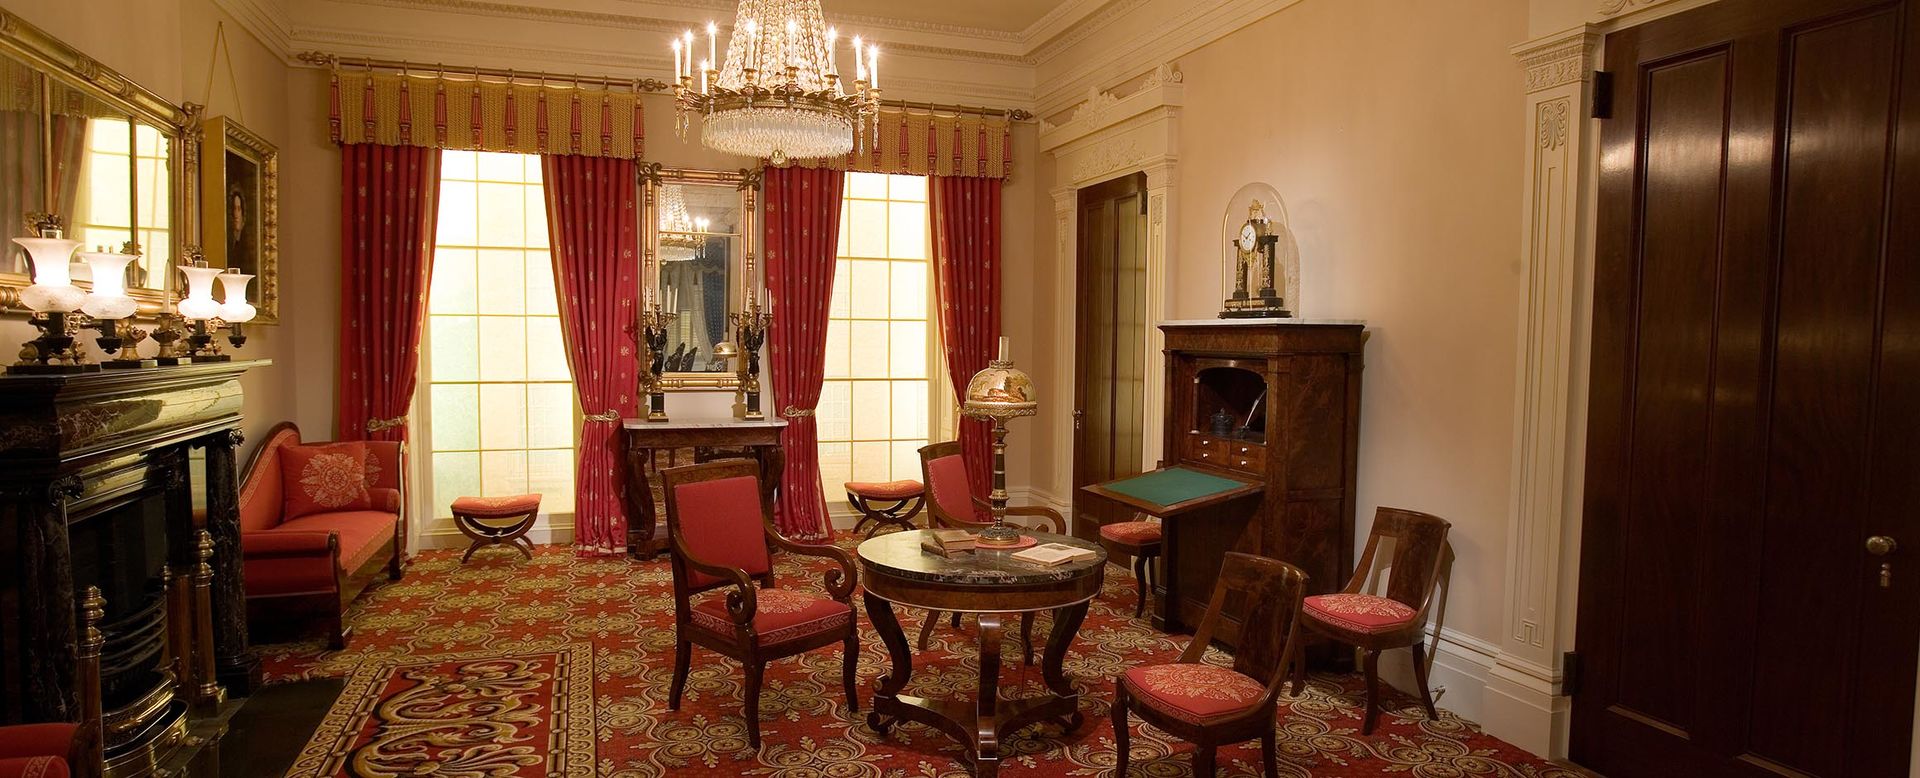 A wide view of the Greek Revival Parlor. A fireplace and mantel, table with four chairs, chandelier, and secretary are seen